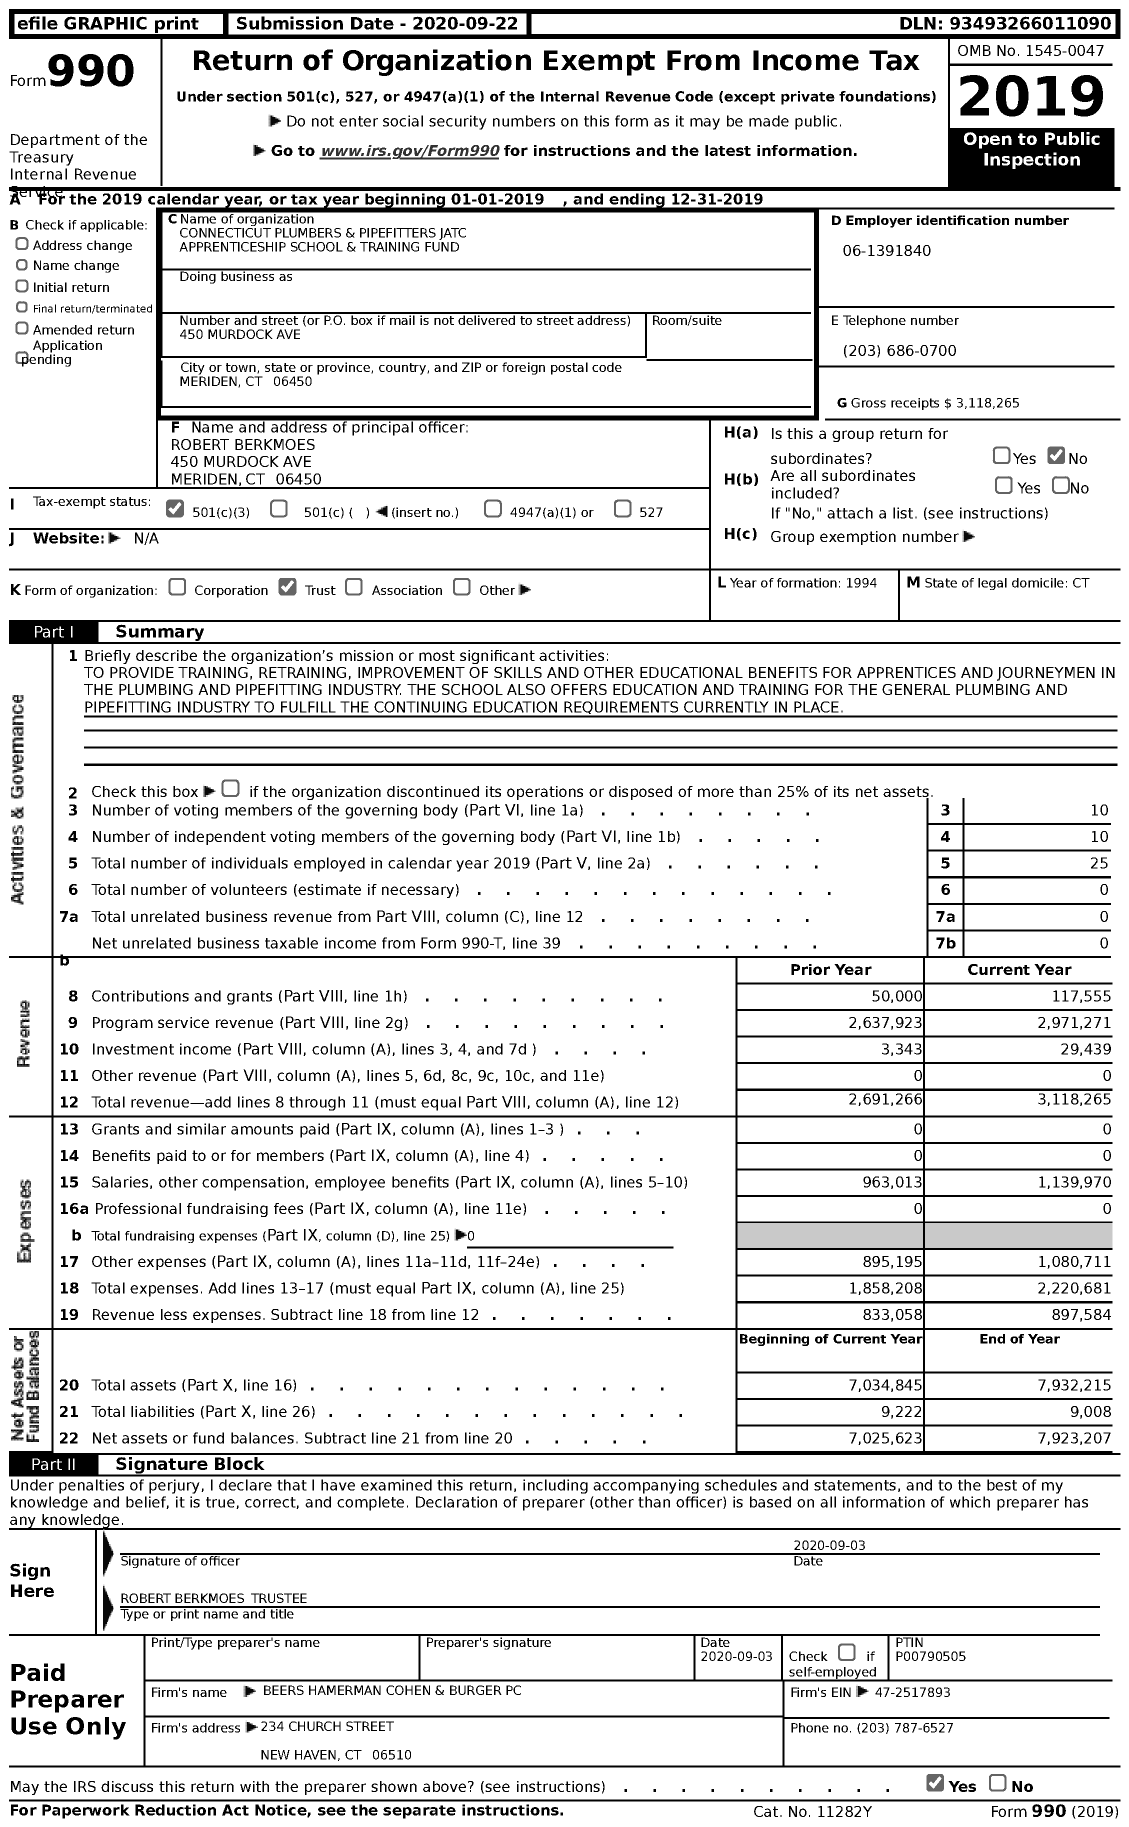 Image of first page of 2019 Form 990 for Connecticut Plumbers and Pipefitters Jatc Apprenticeship School and Training Fund